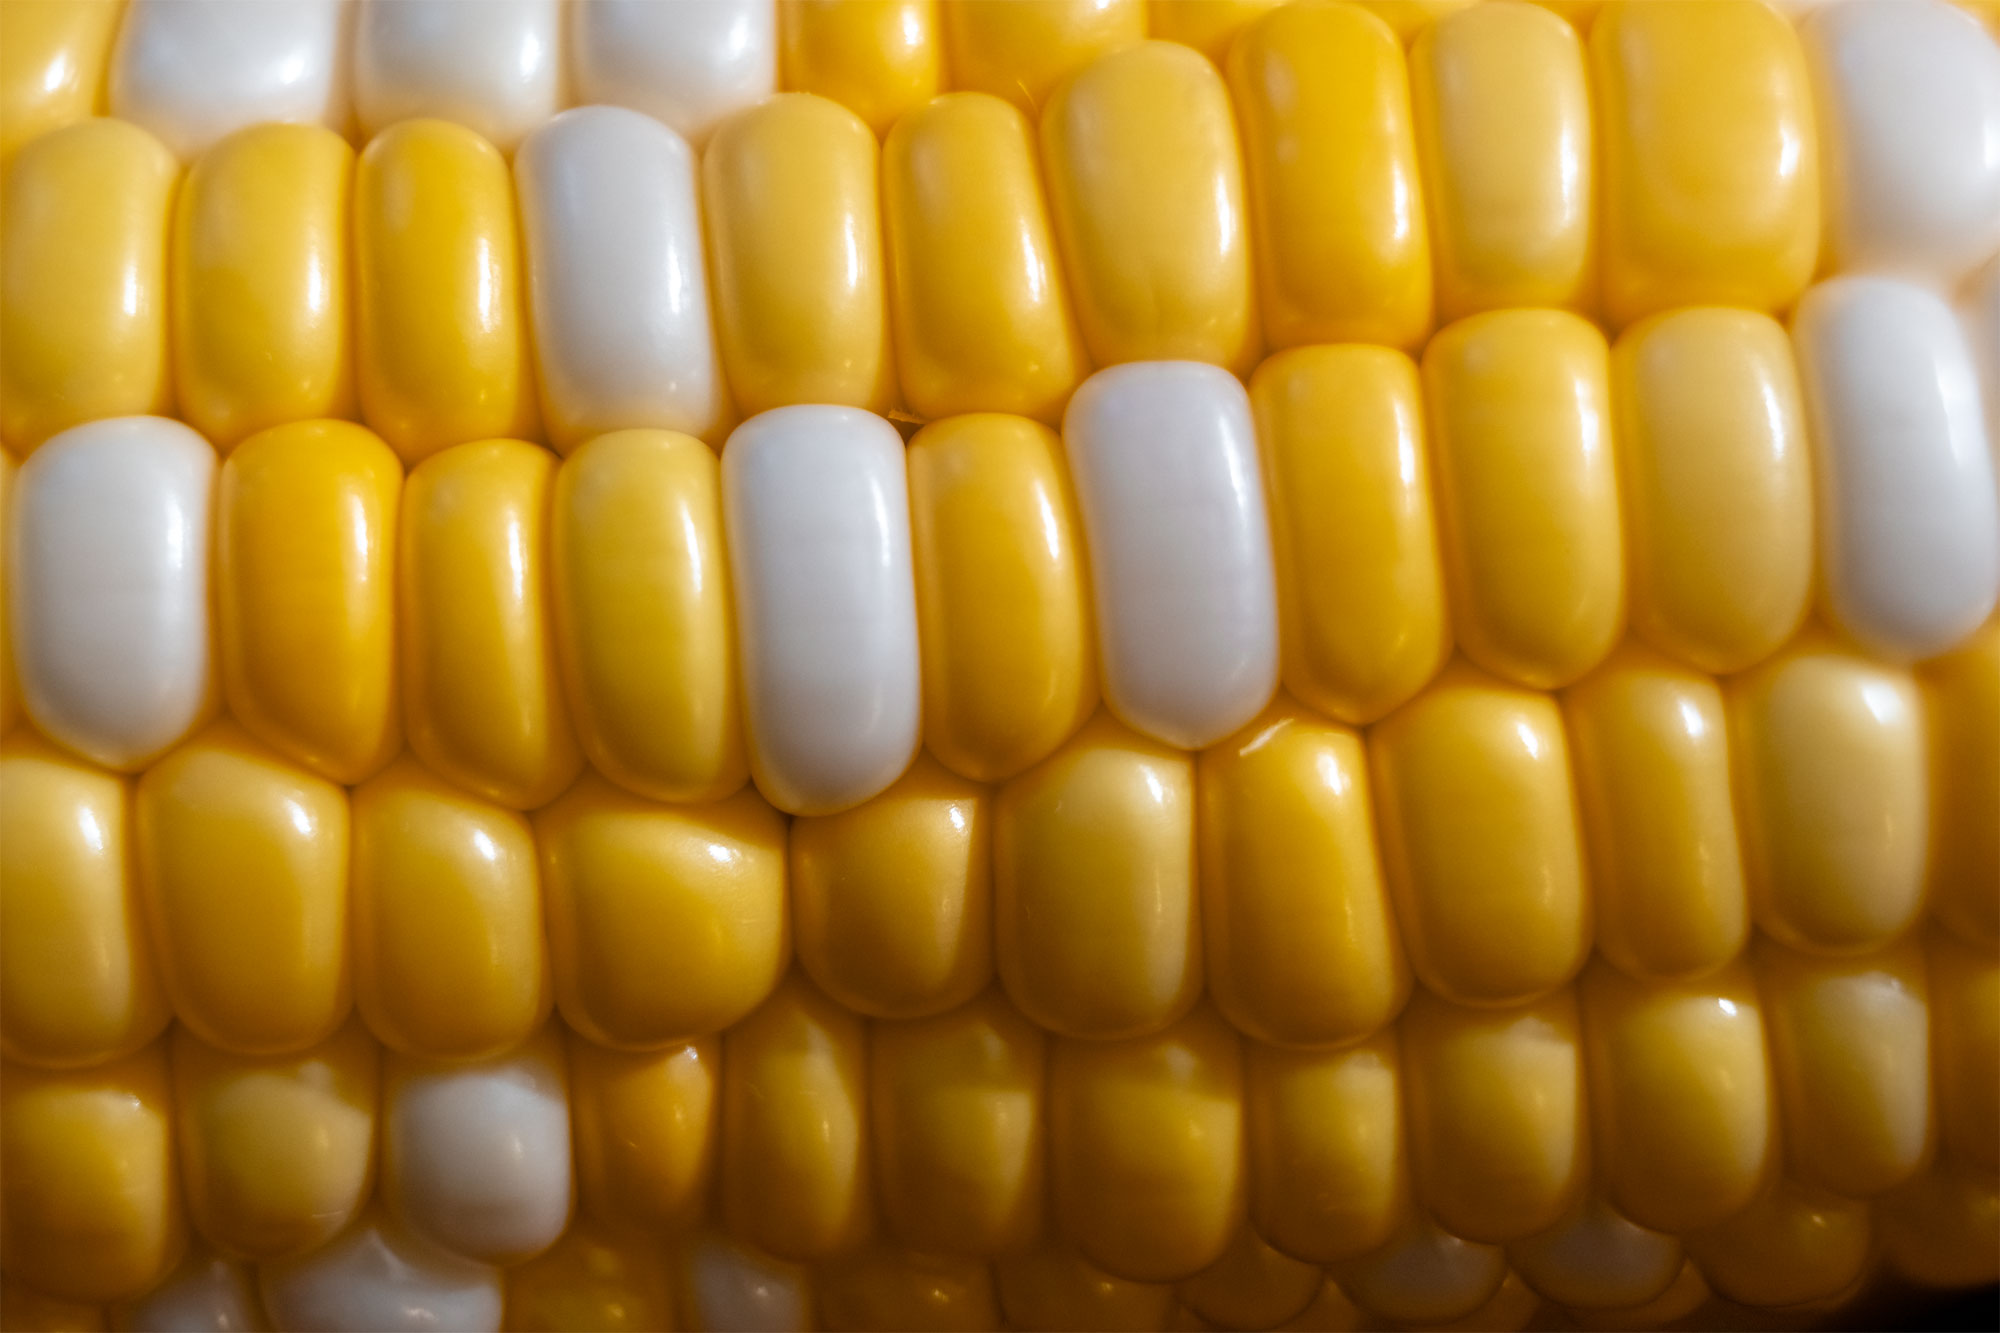 Photograph of kernels on an ear of sweet corn. The photo shows plump yellow and white maize kernels.